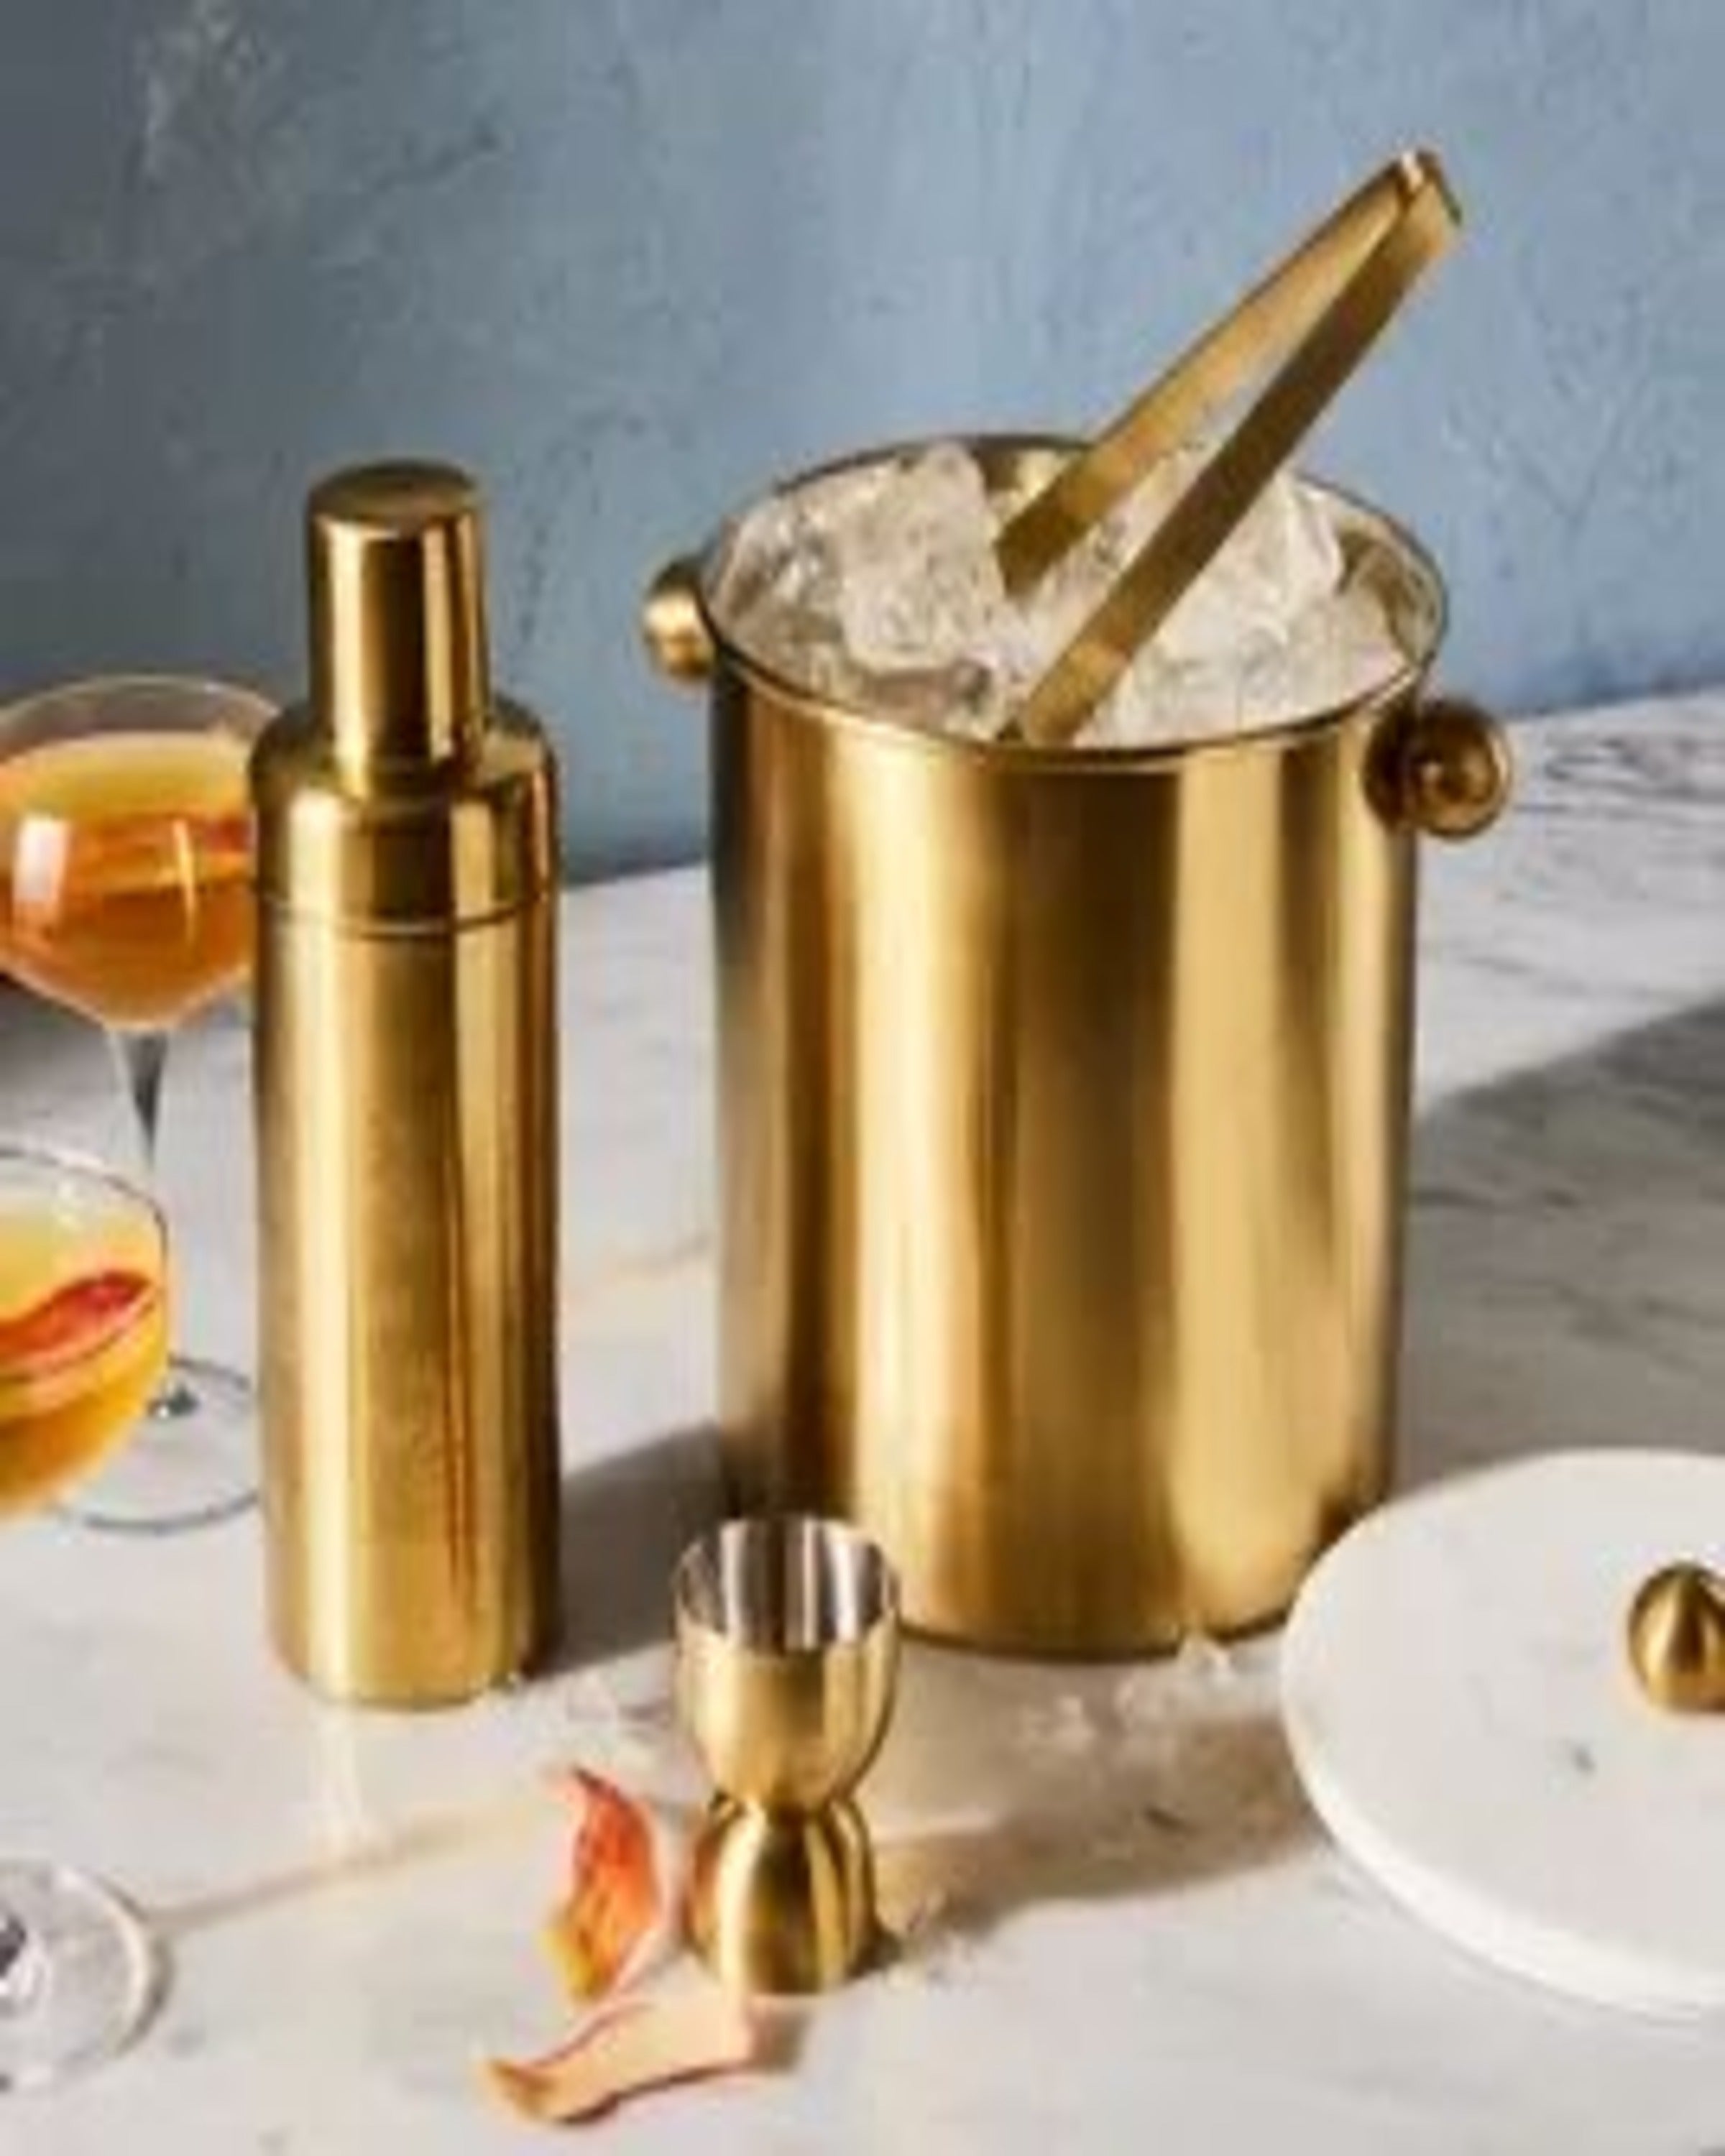 Mixology Bar Accessories ANGIE HOMES